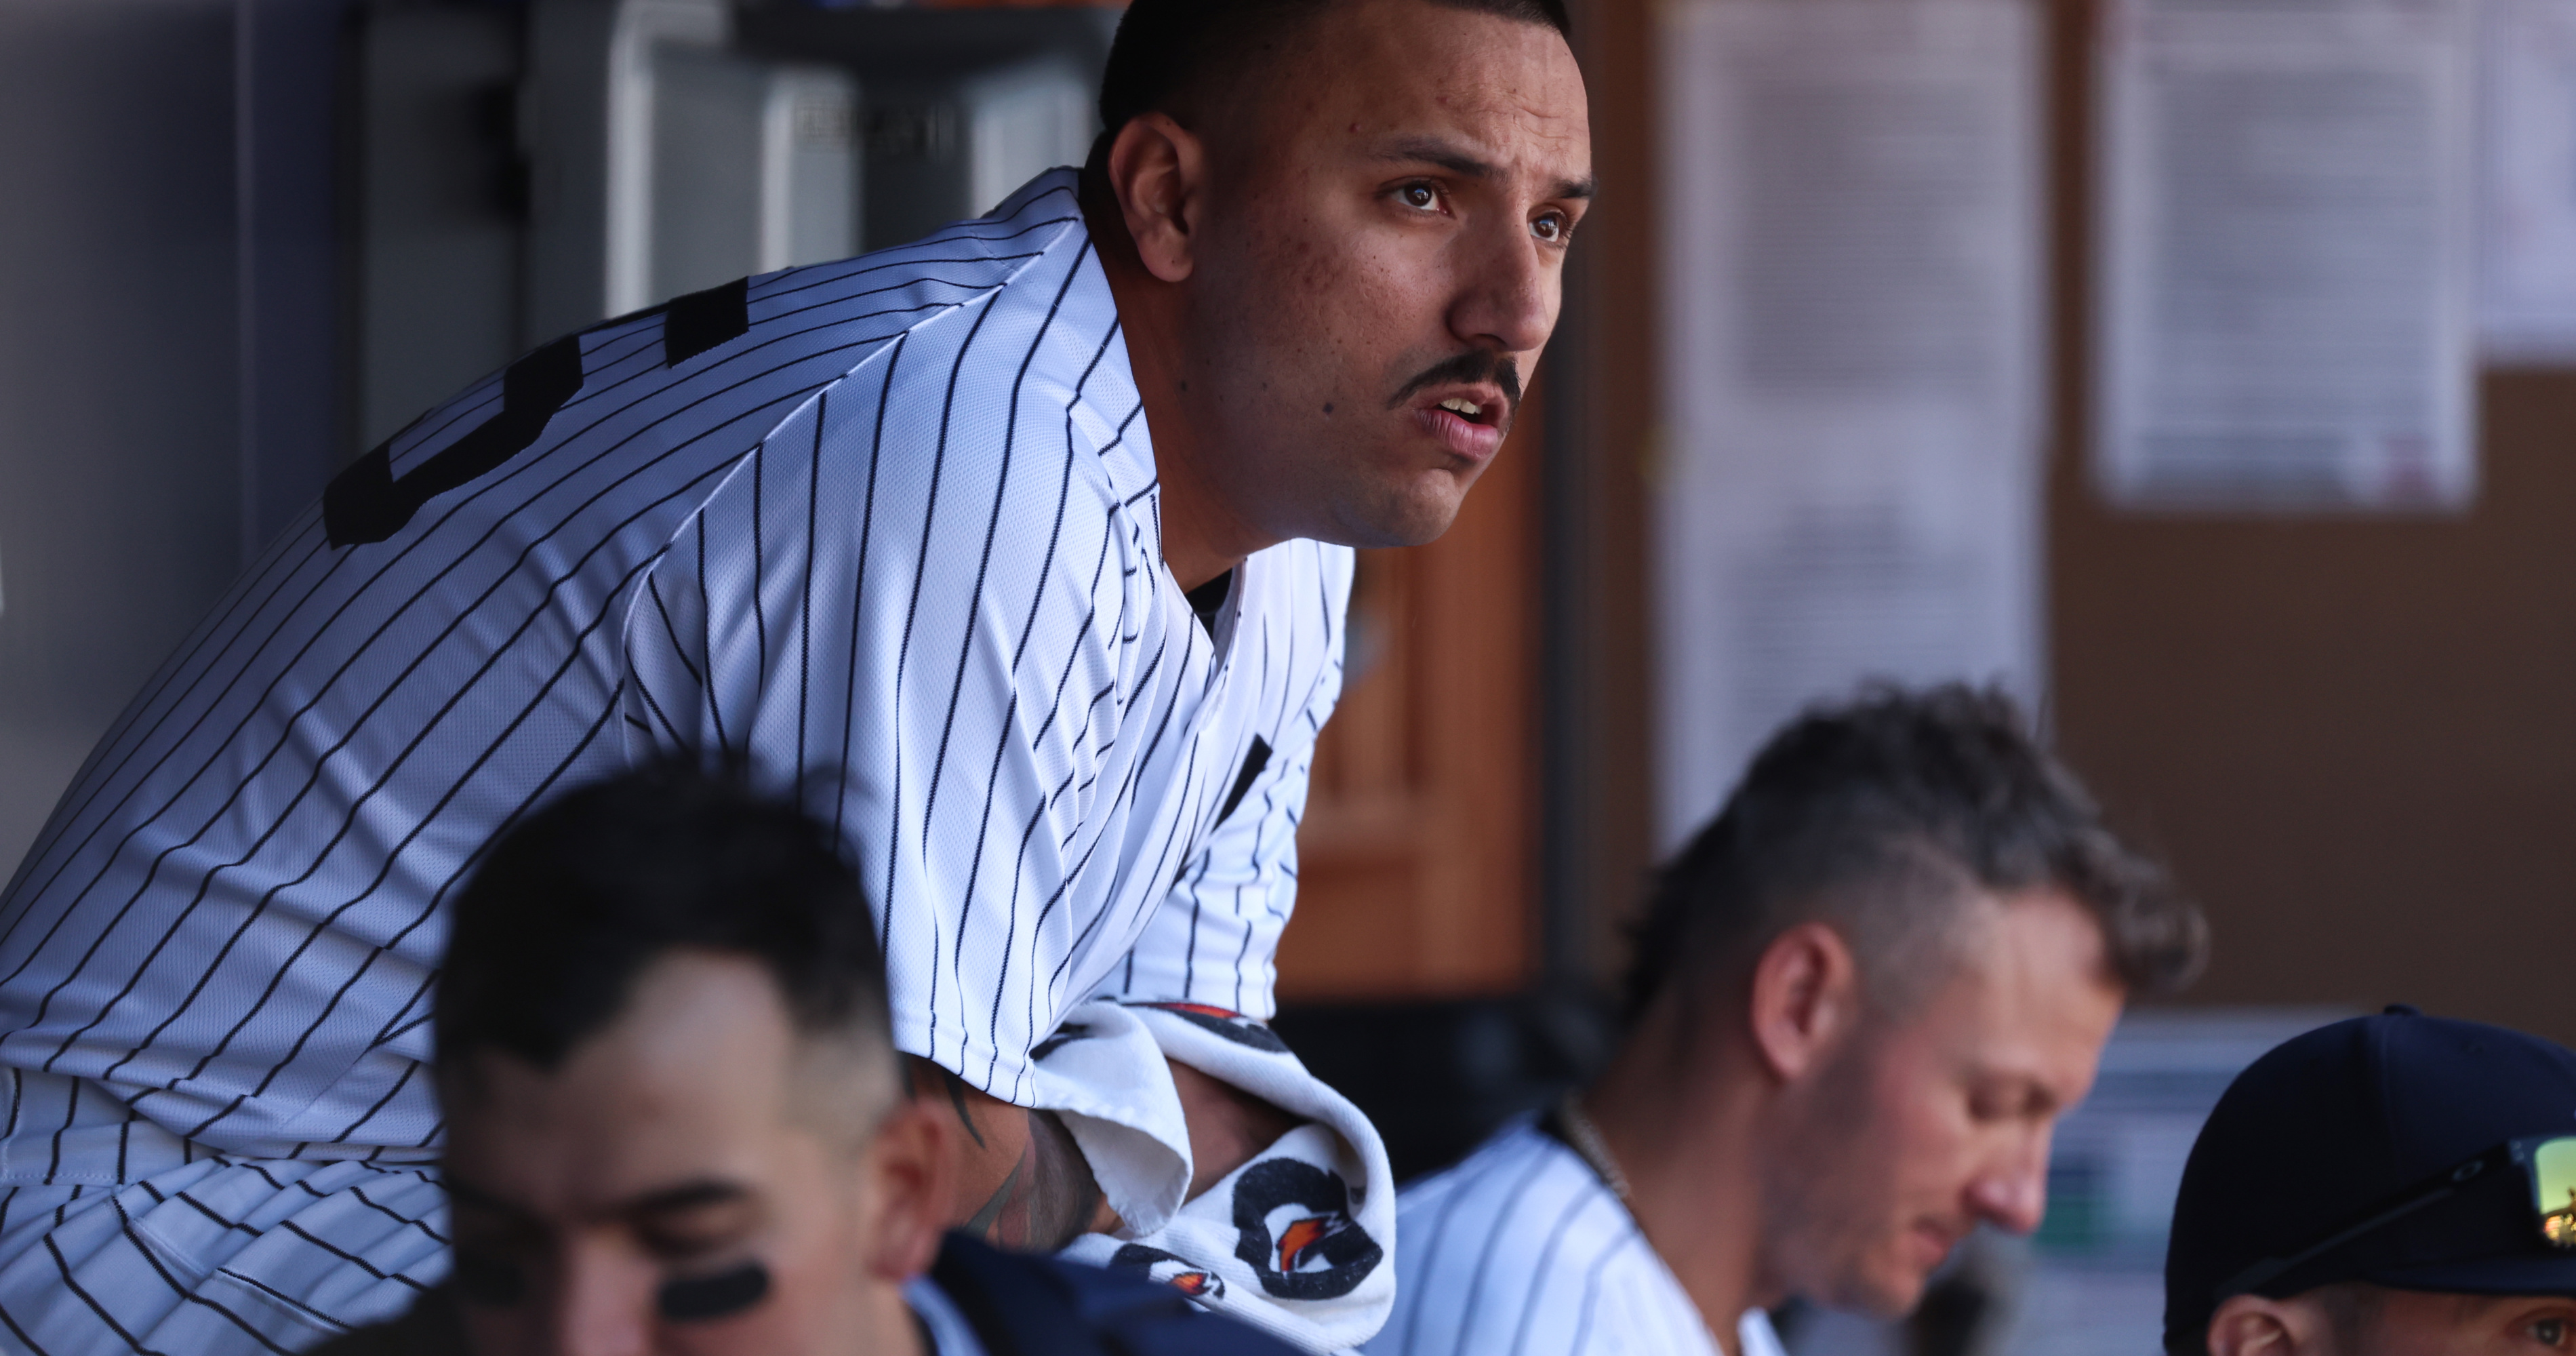 Yankees' Season Of Disappointment: Cortes Speaks Out